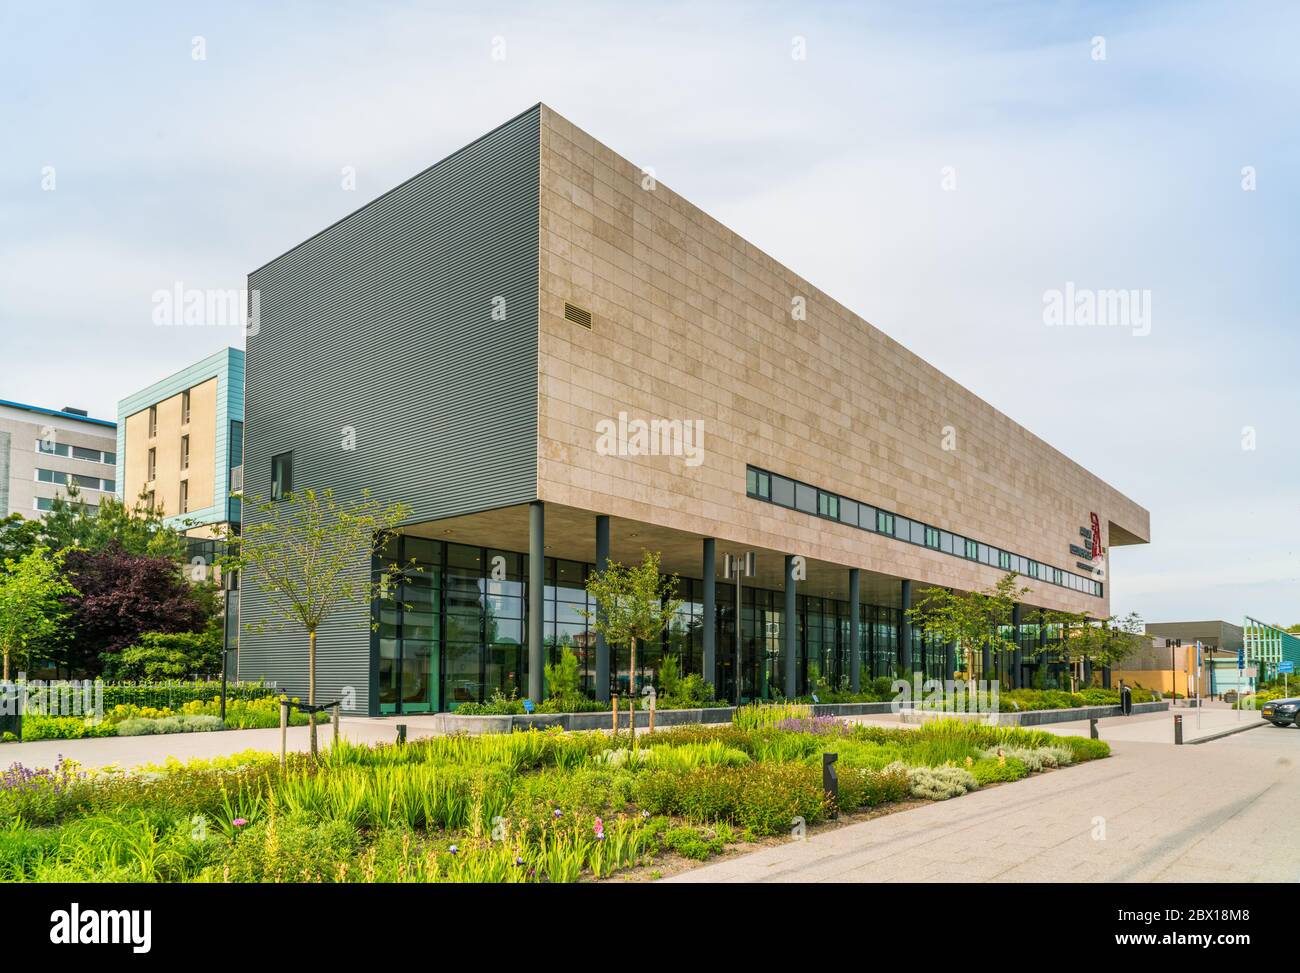 Amsterdam, The Netherlands, May 22 2017: Exterior of the famous Antoni van Leeuwenhoek institute for Cancer research and treatment Stock Photo